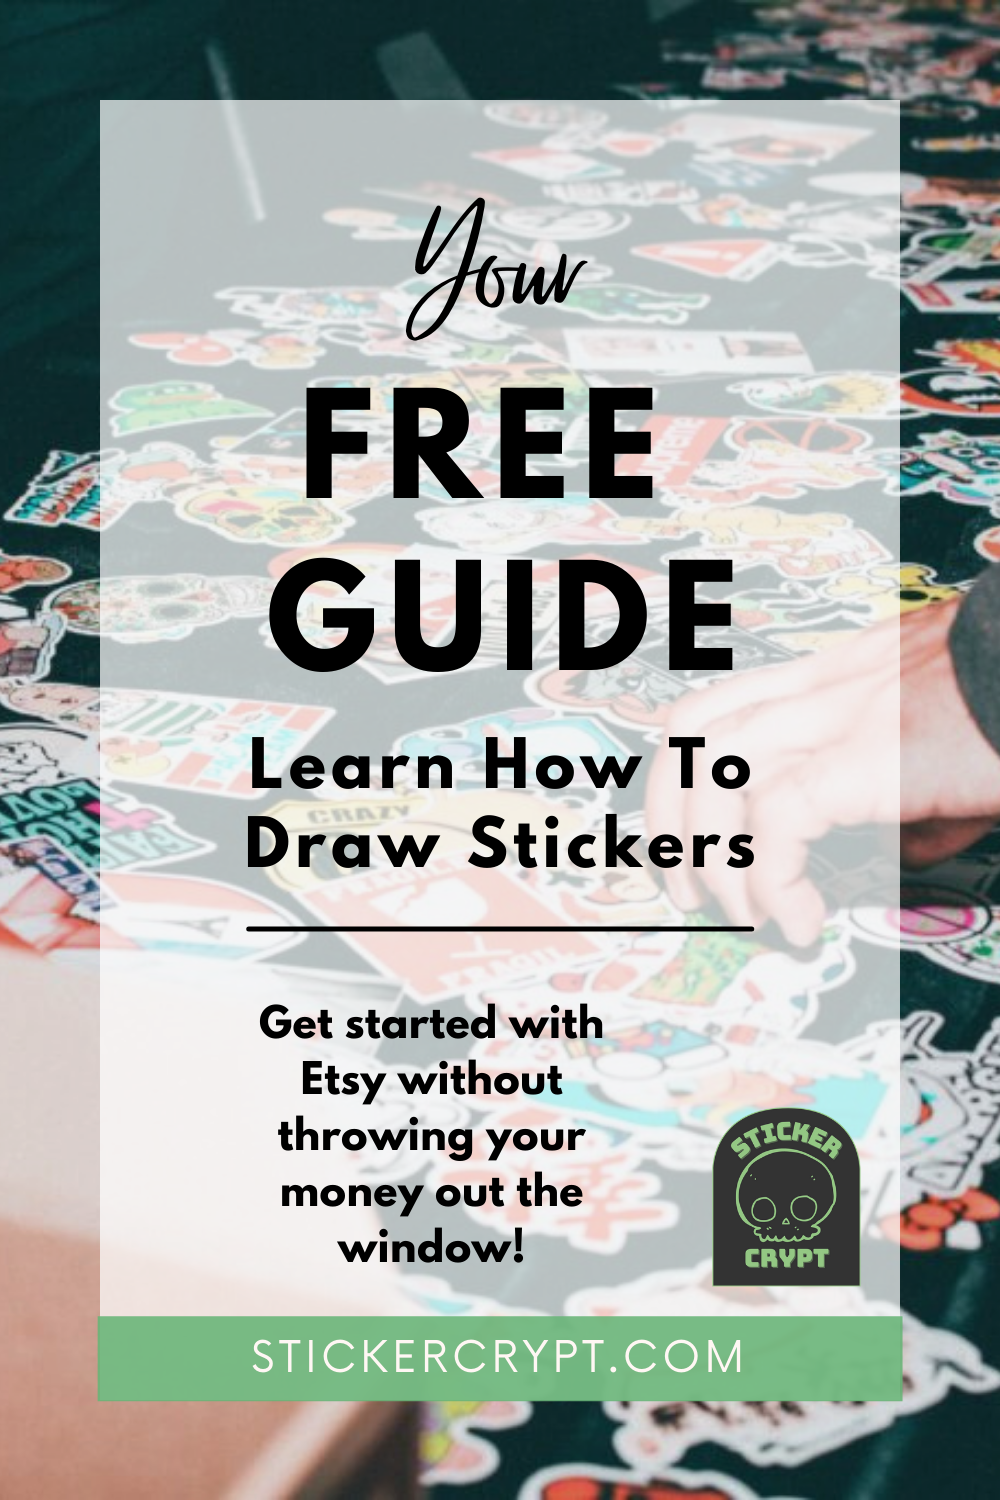 A FREE GUIDE: Learn How To Draw Stickers – Sticker Crypt